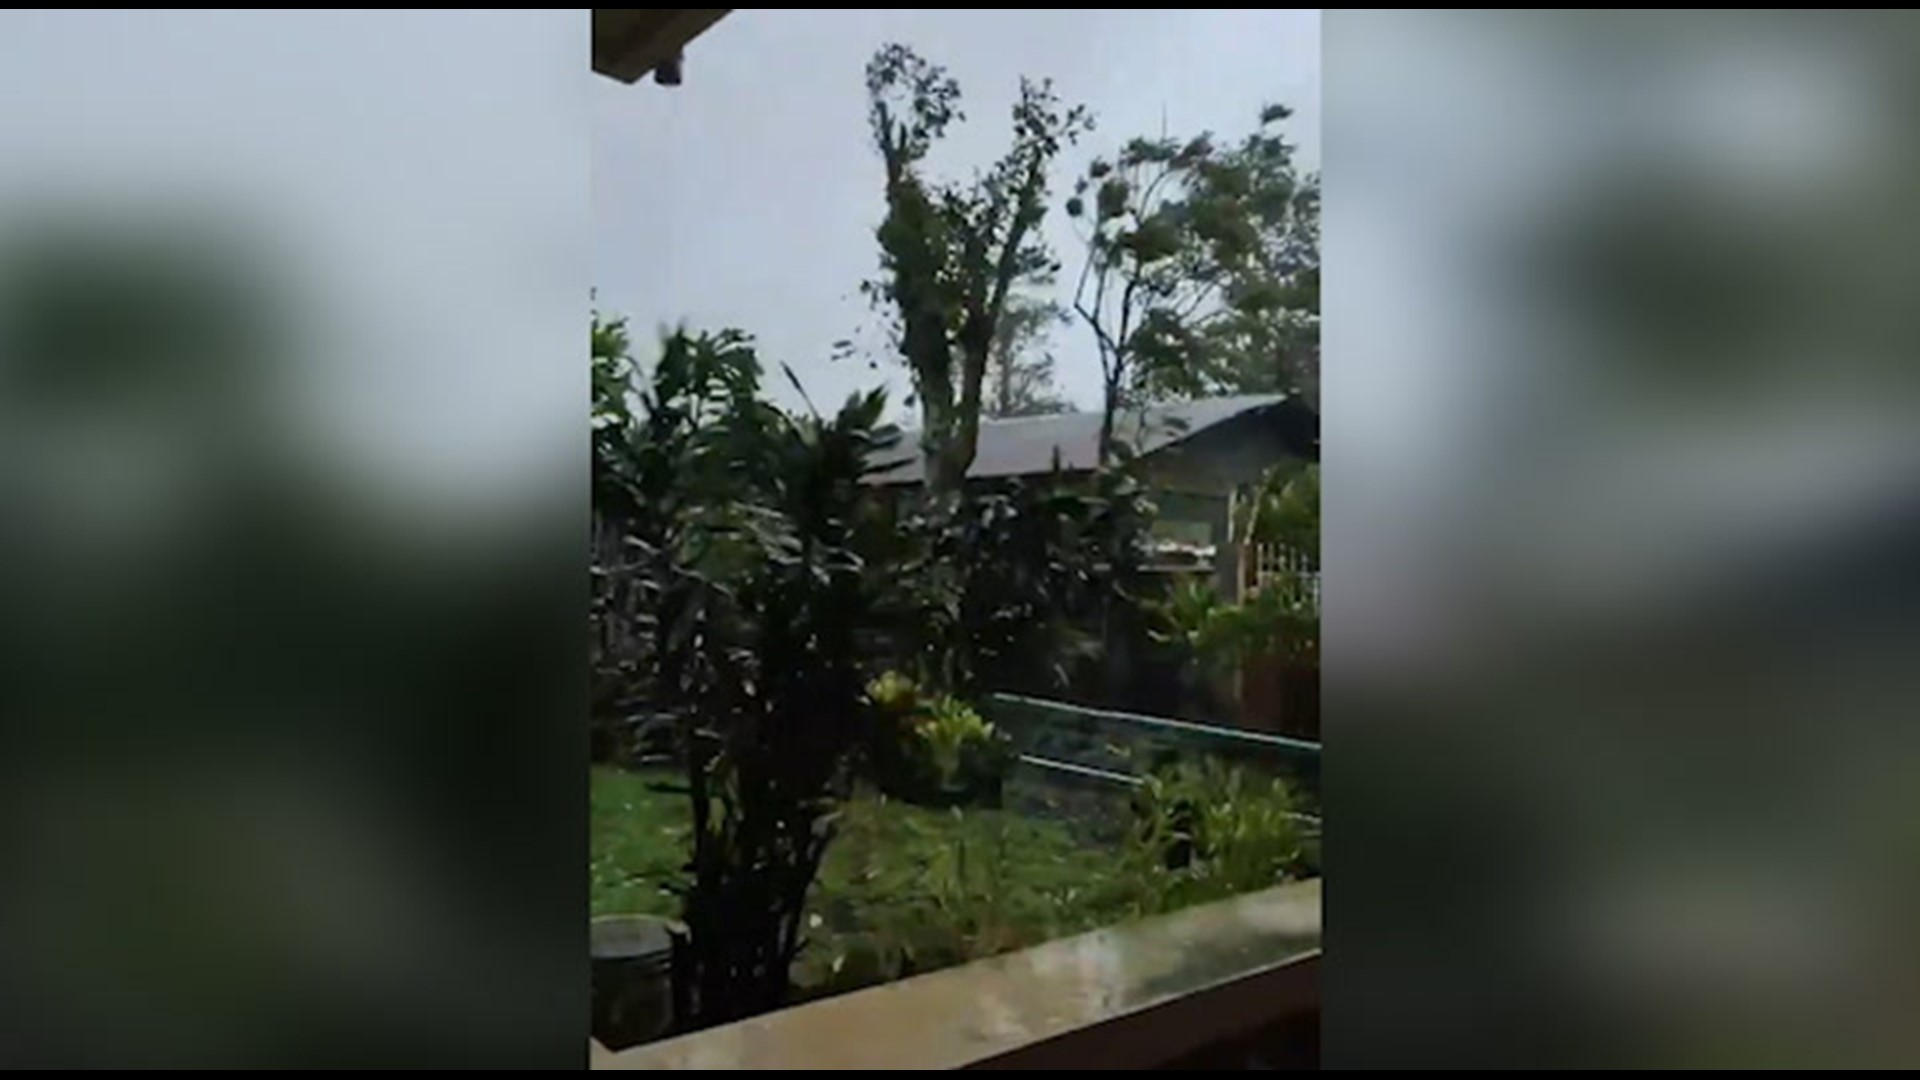 Video captures trees swaying in high winds as residents brace for the landfall of Typhoon Rolly in Iriga, Philippines, on Oct. 31.